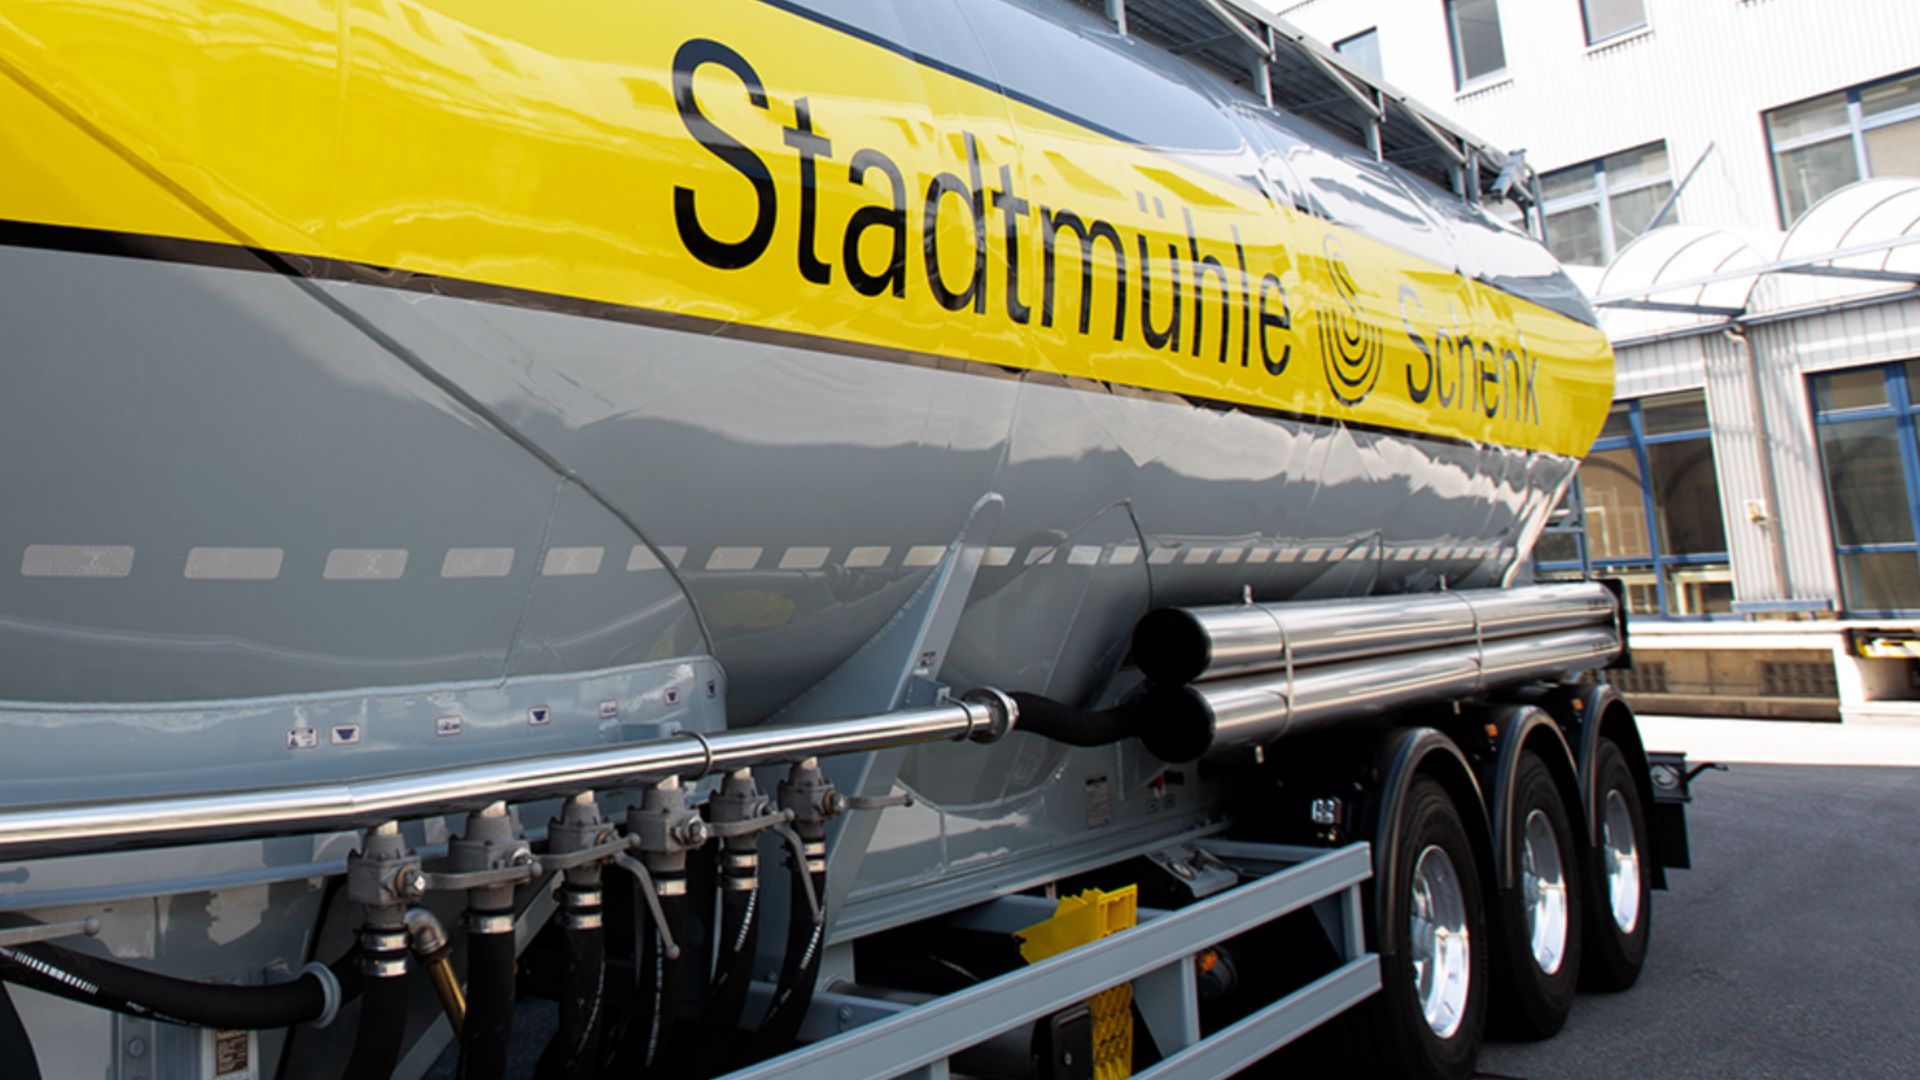 Stadtmühle Schenk AG has been acquired by Kowema AG